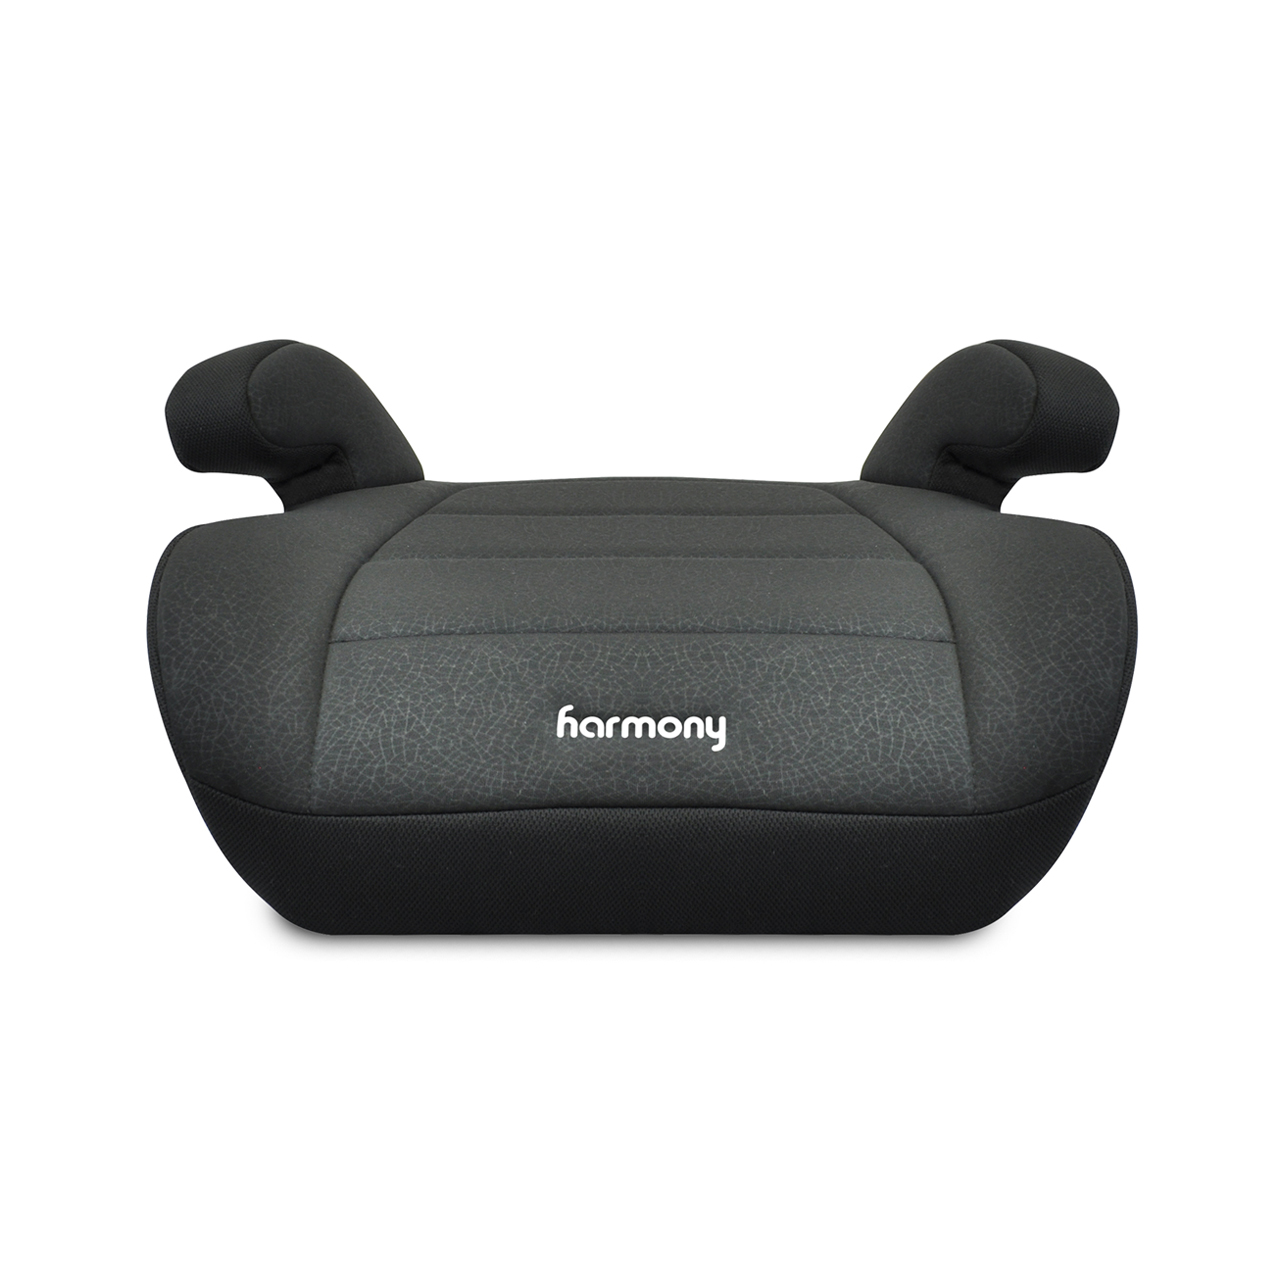 Harmony Juvenile Youth Backless Booster Car Seat, Black - image 2 of 7